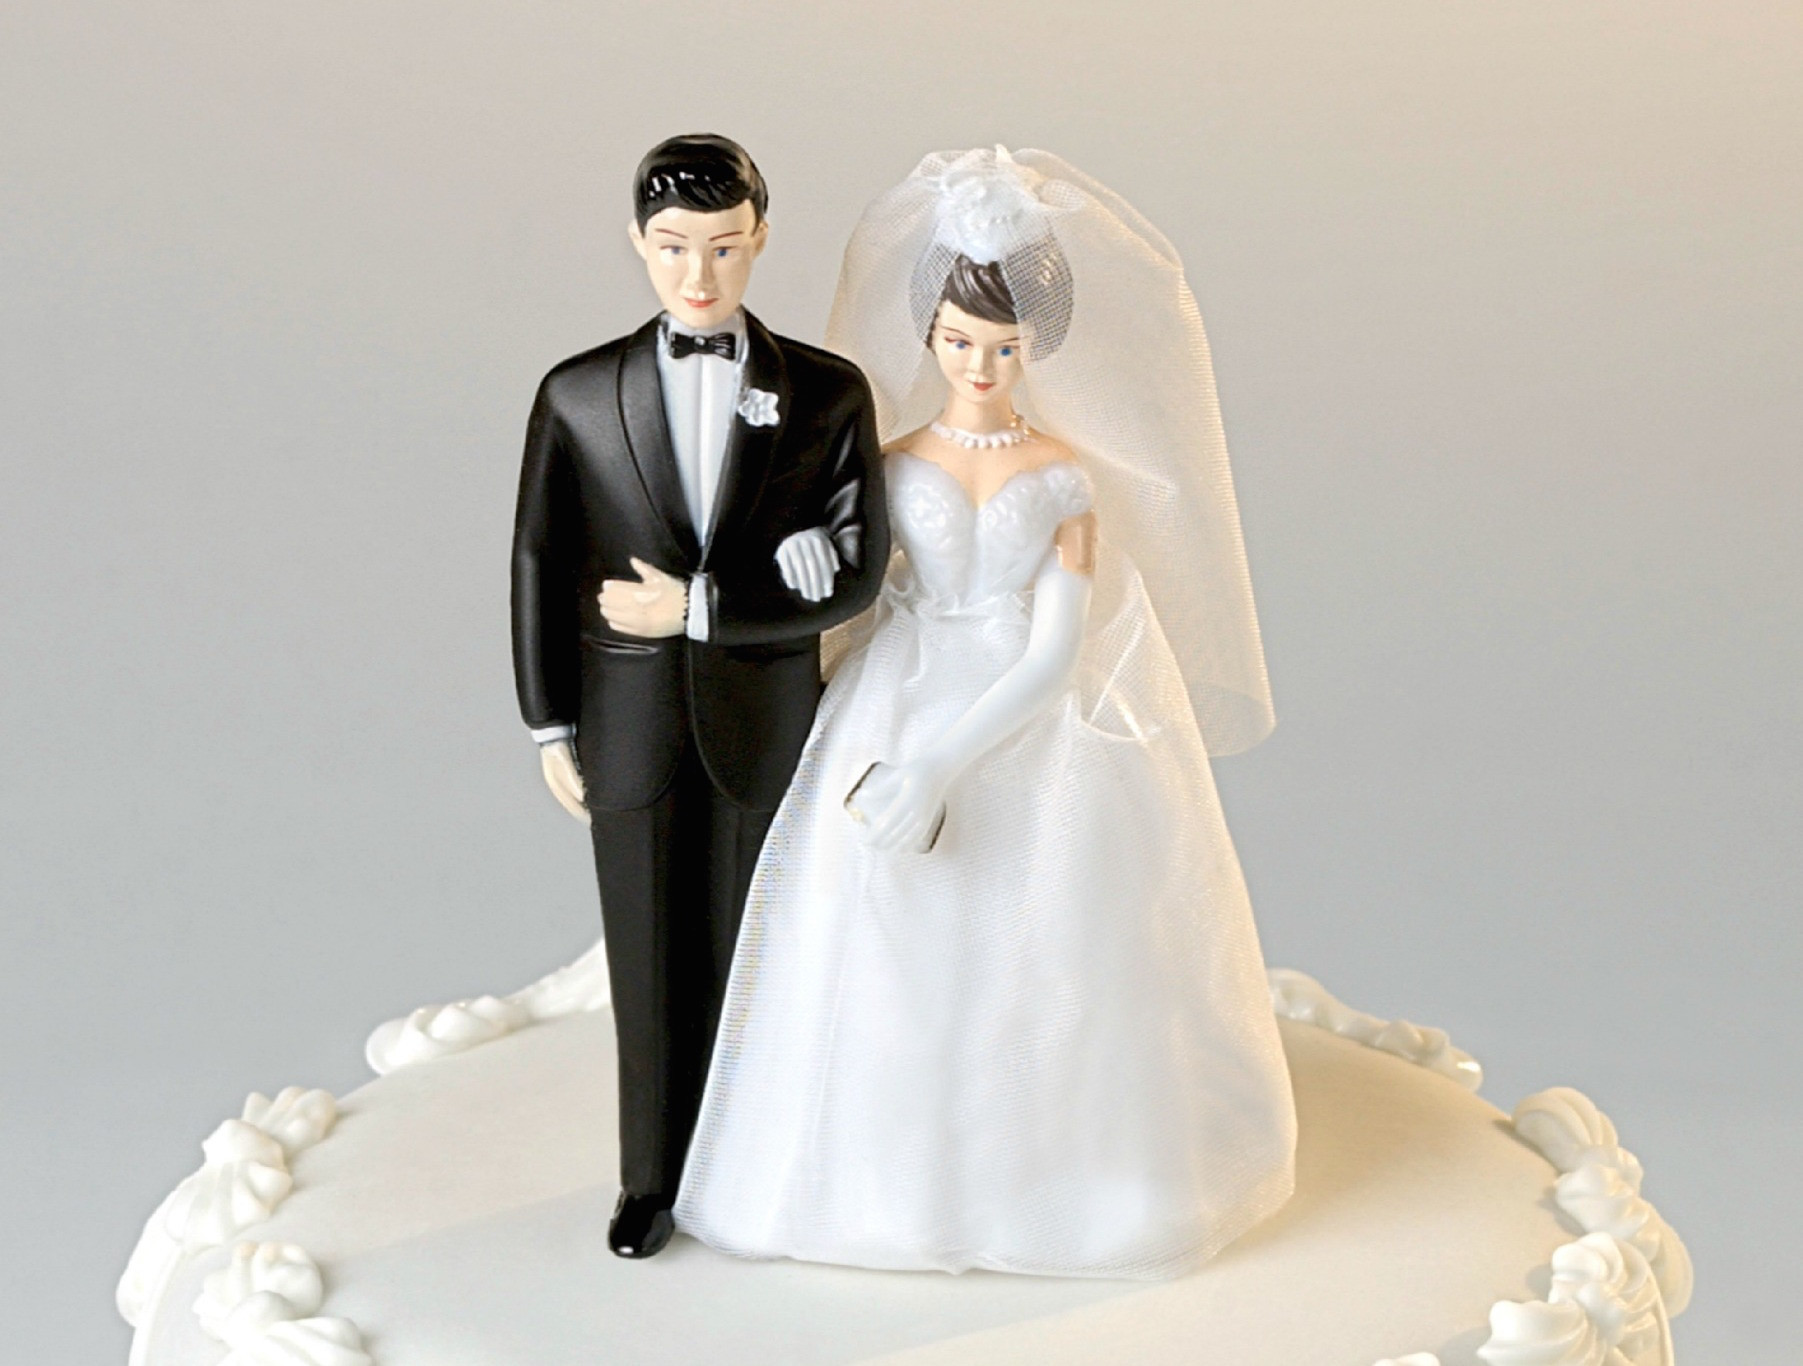 Wedding Cakes Top
 Not Your Average Cake Toppers